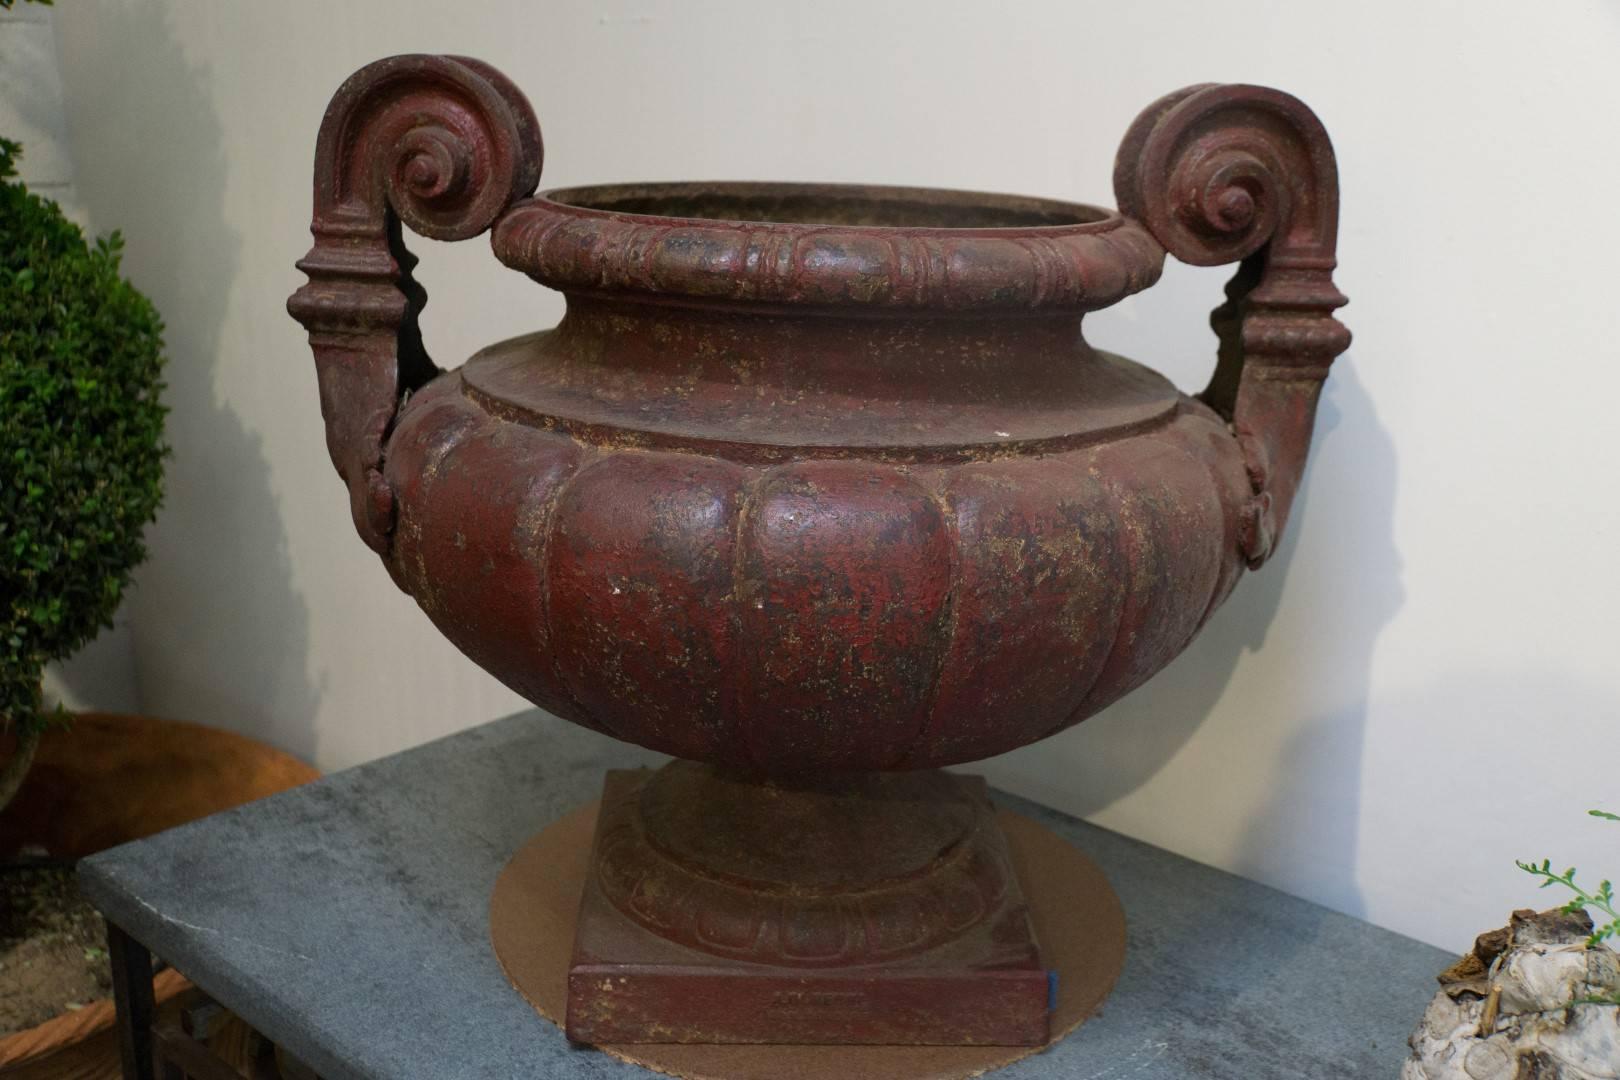 Pair of cast iron Medici urns cast by Durenne Founder in AIX
Aix de Provence,
circa 1880
Measures: 21